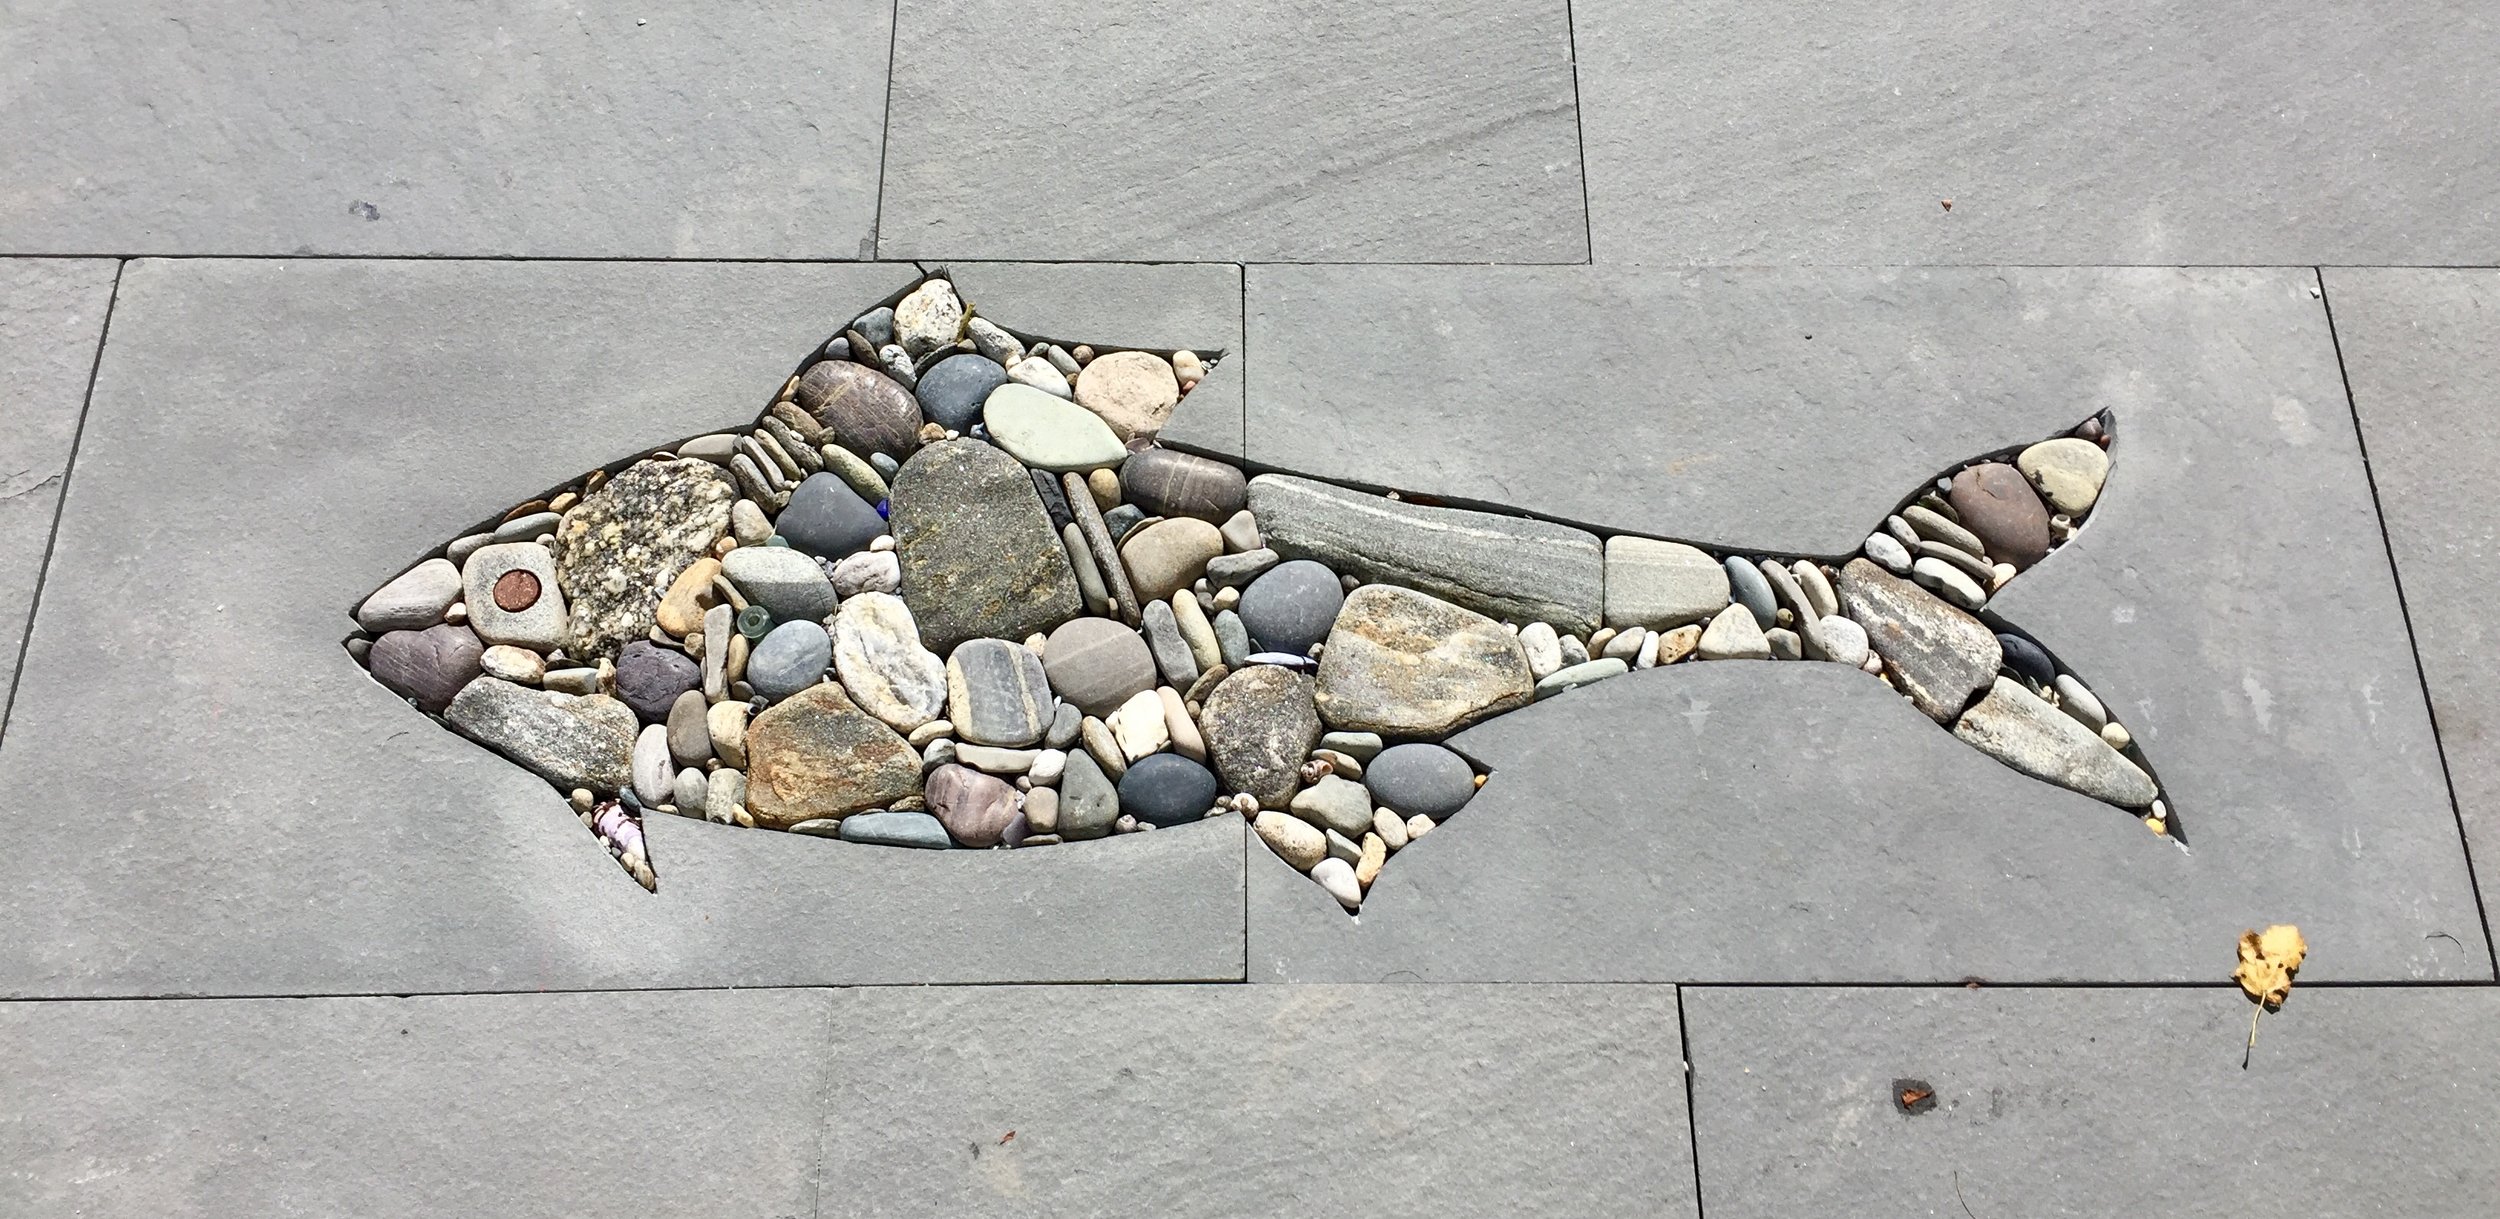  The fish a year after install. We used polymeric sand to hold the pebbles together and it’s working great. 